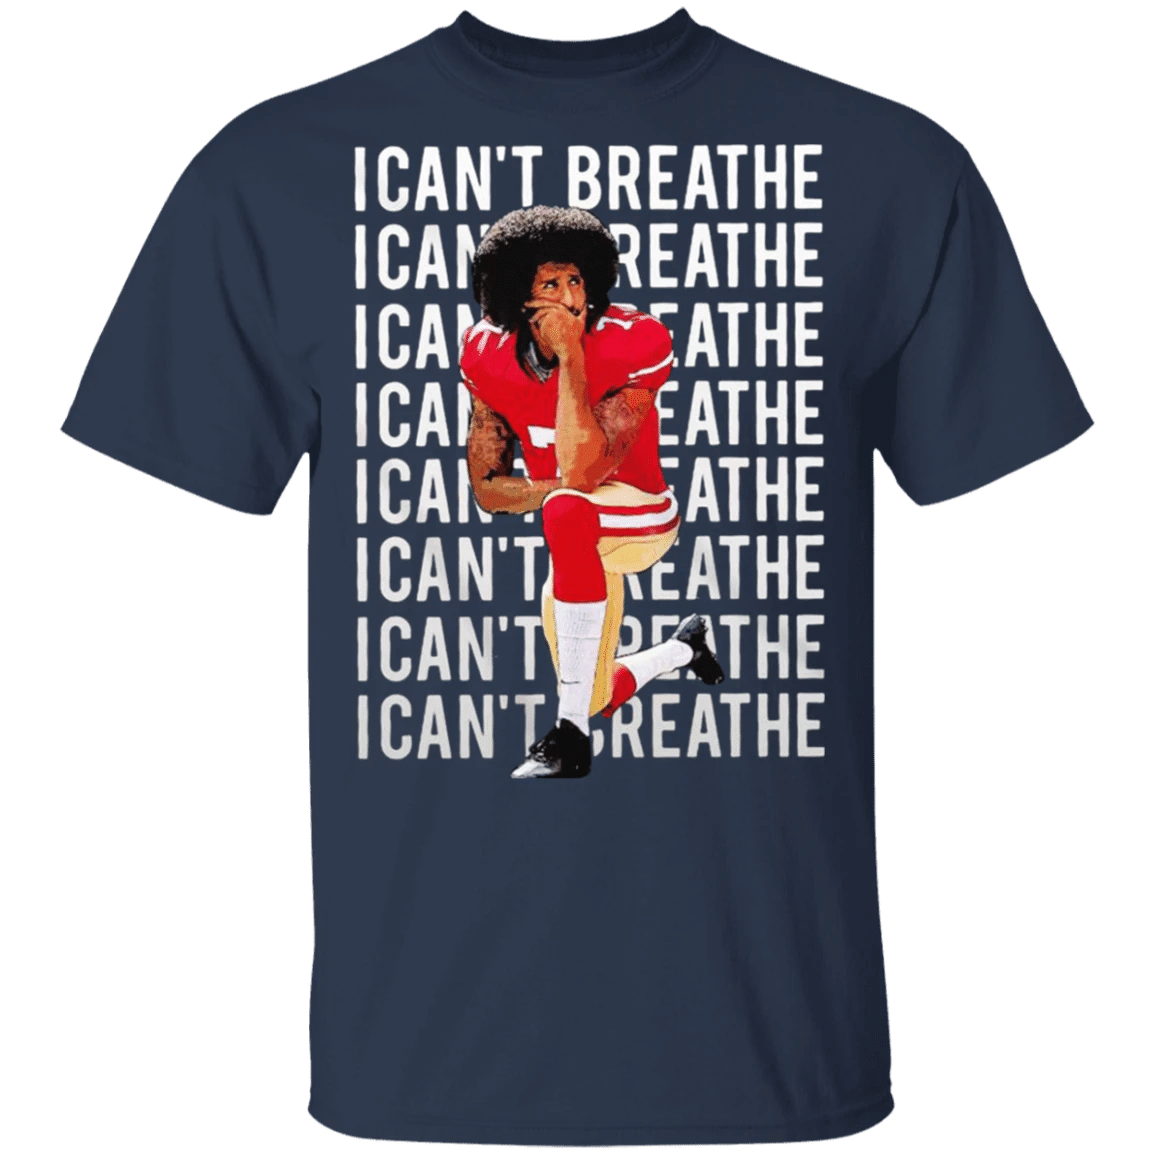 Colin Kaepernick I Can't Breathe T-Shirt Rest in Power George Floyd Protest Shirt